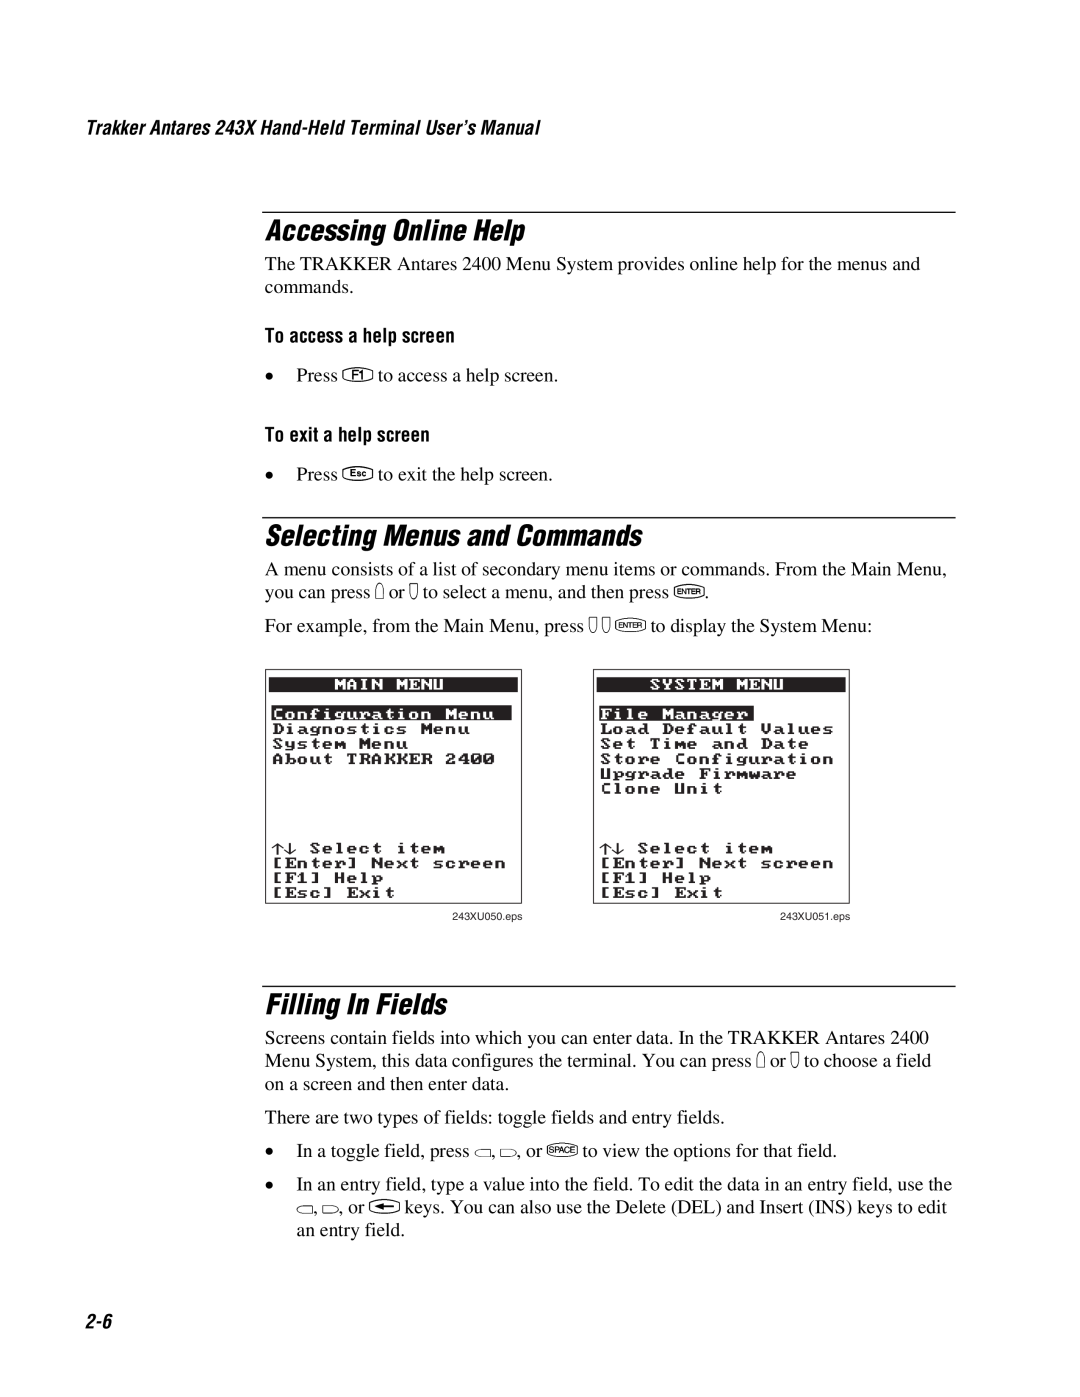 IBM 243X user manual Accessing Online Help, Selecting Menus and Commands, Filling In Fields, To access a help screen 